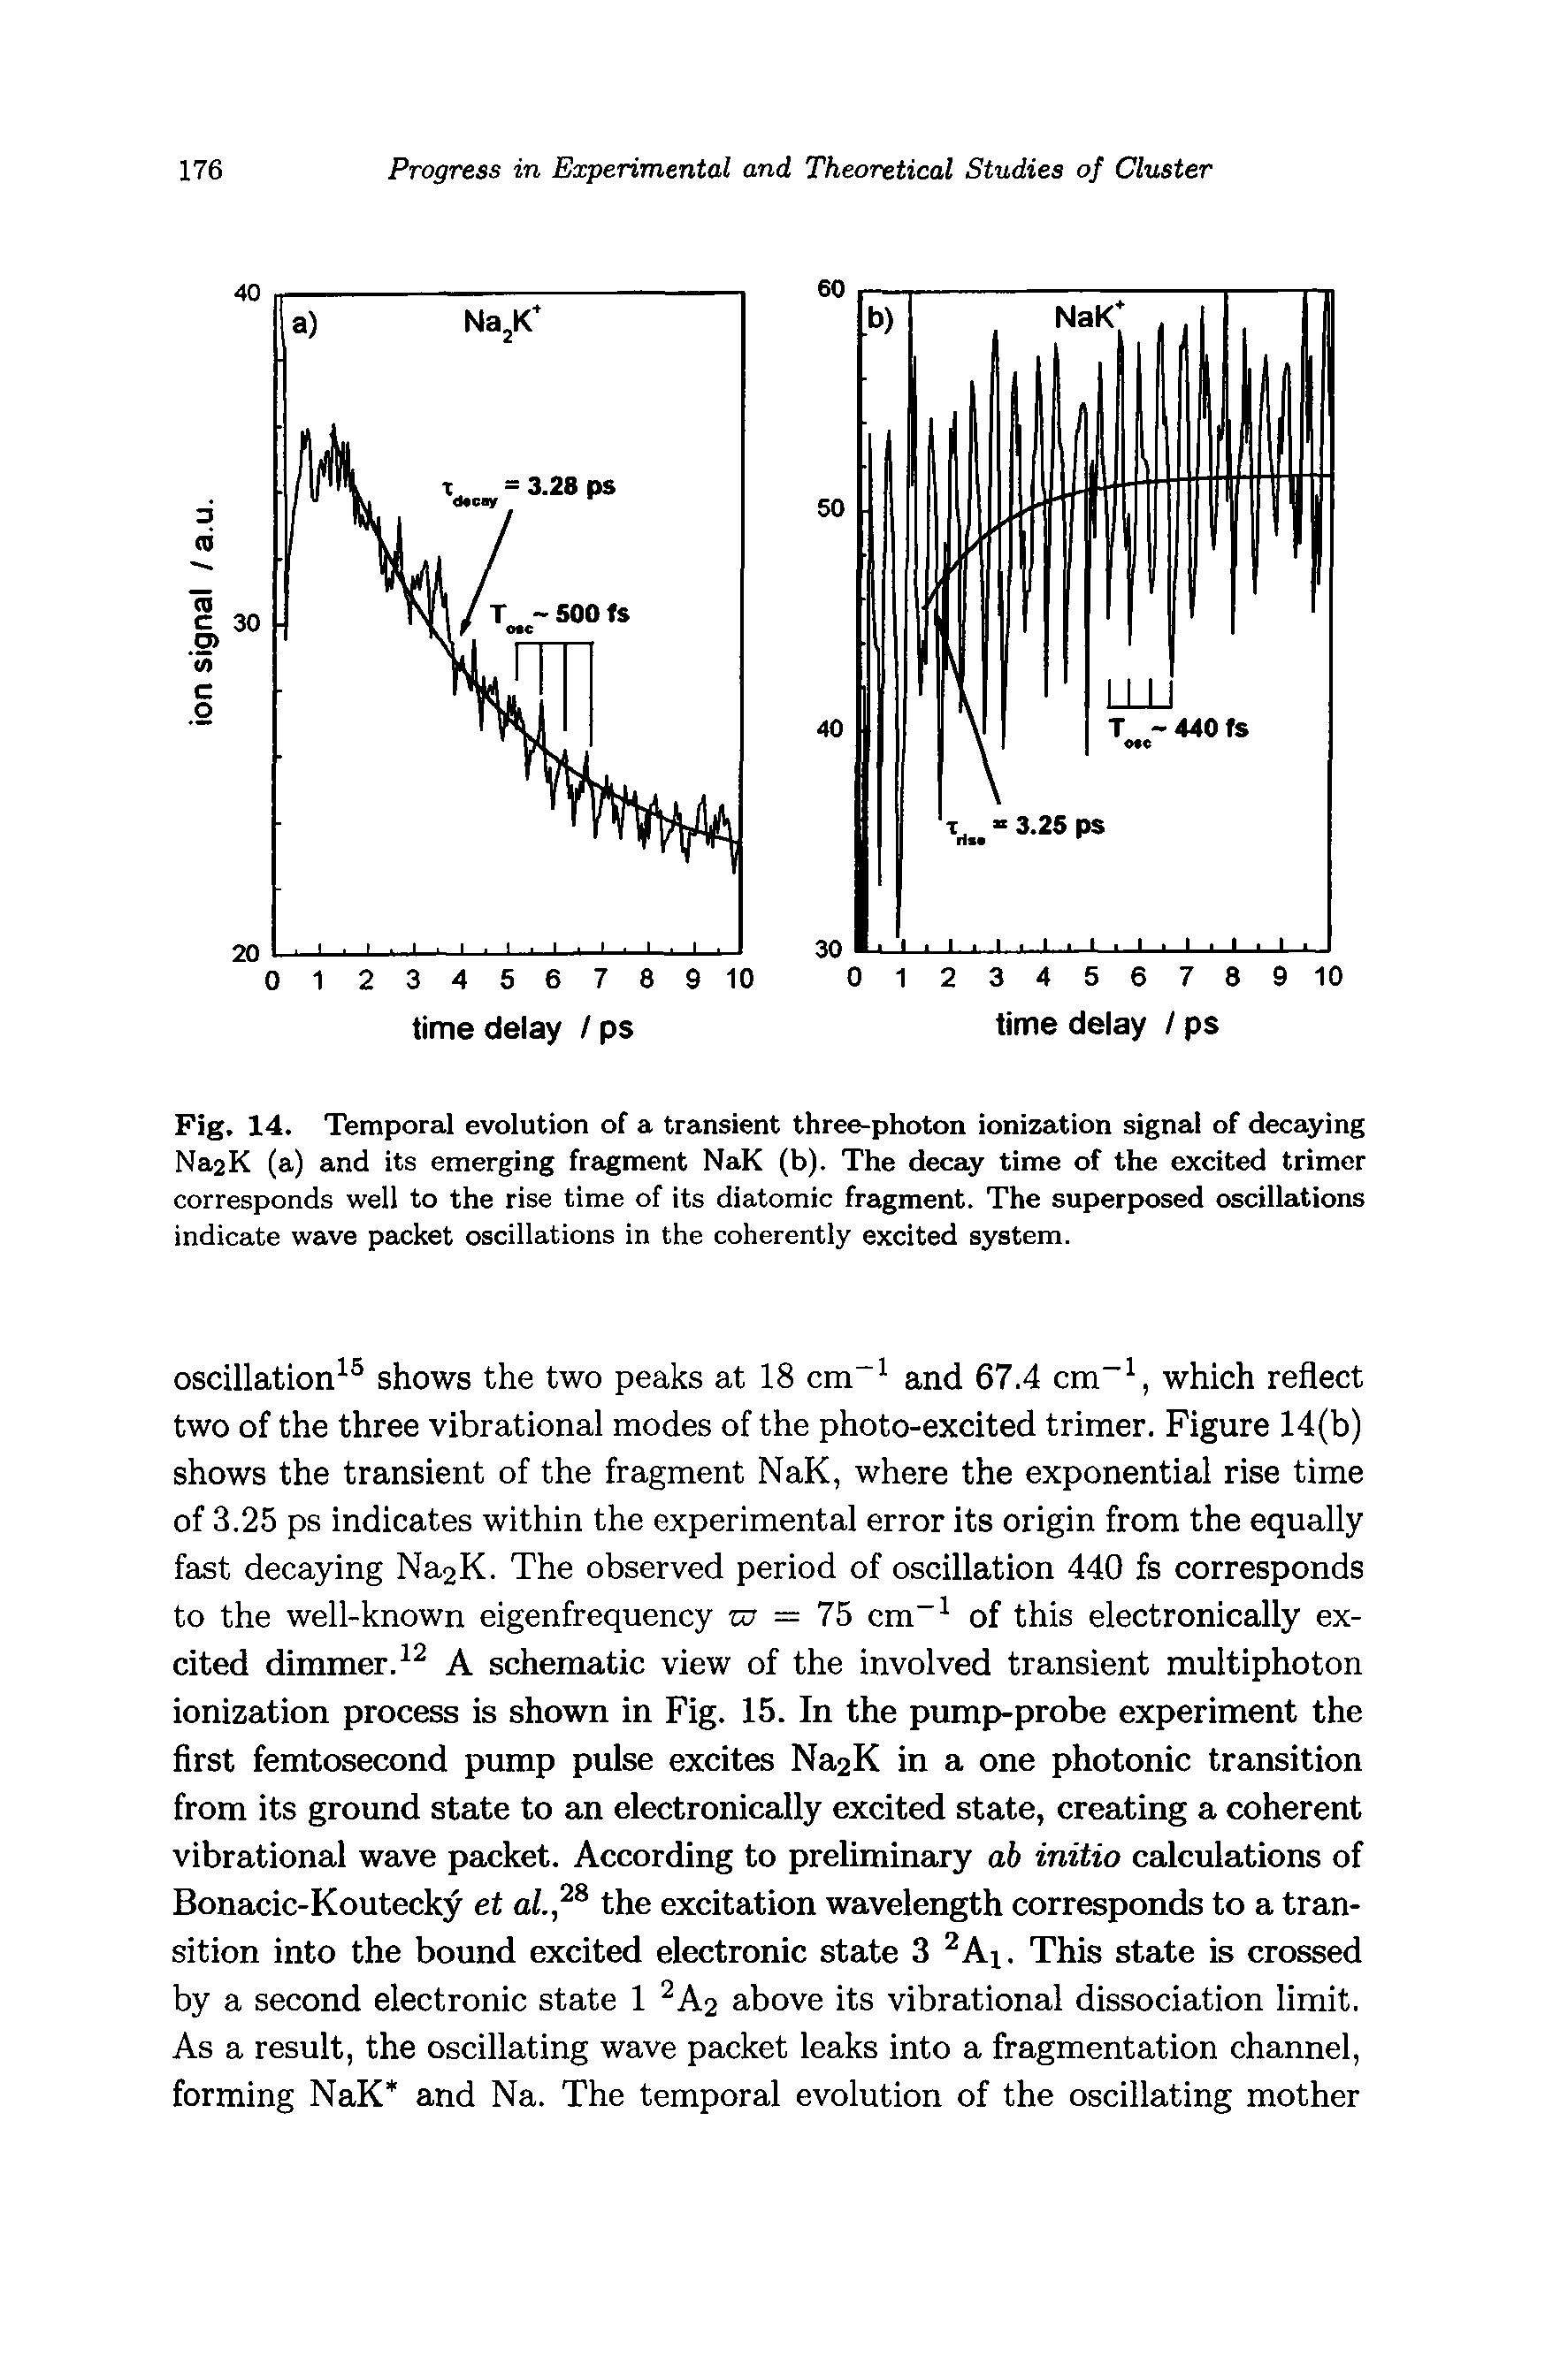 Fig. 14. Temporal evolution of a transient three-photon ionization signal of decaying Na2K (a) and its emerging fragment NaK (b). The decay time of the excited trimcr corresponds well to the rise time of its diatomic fragment. The superposed oscillations indicate wave packet oscillations in the coherently excited system.